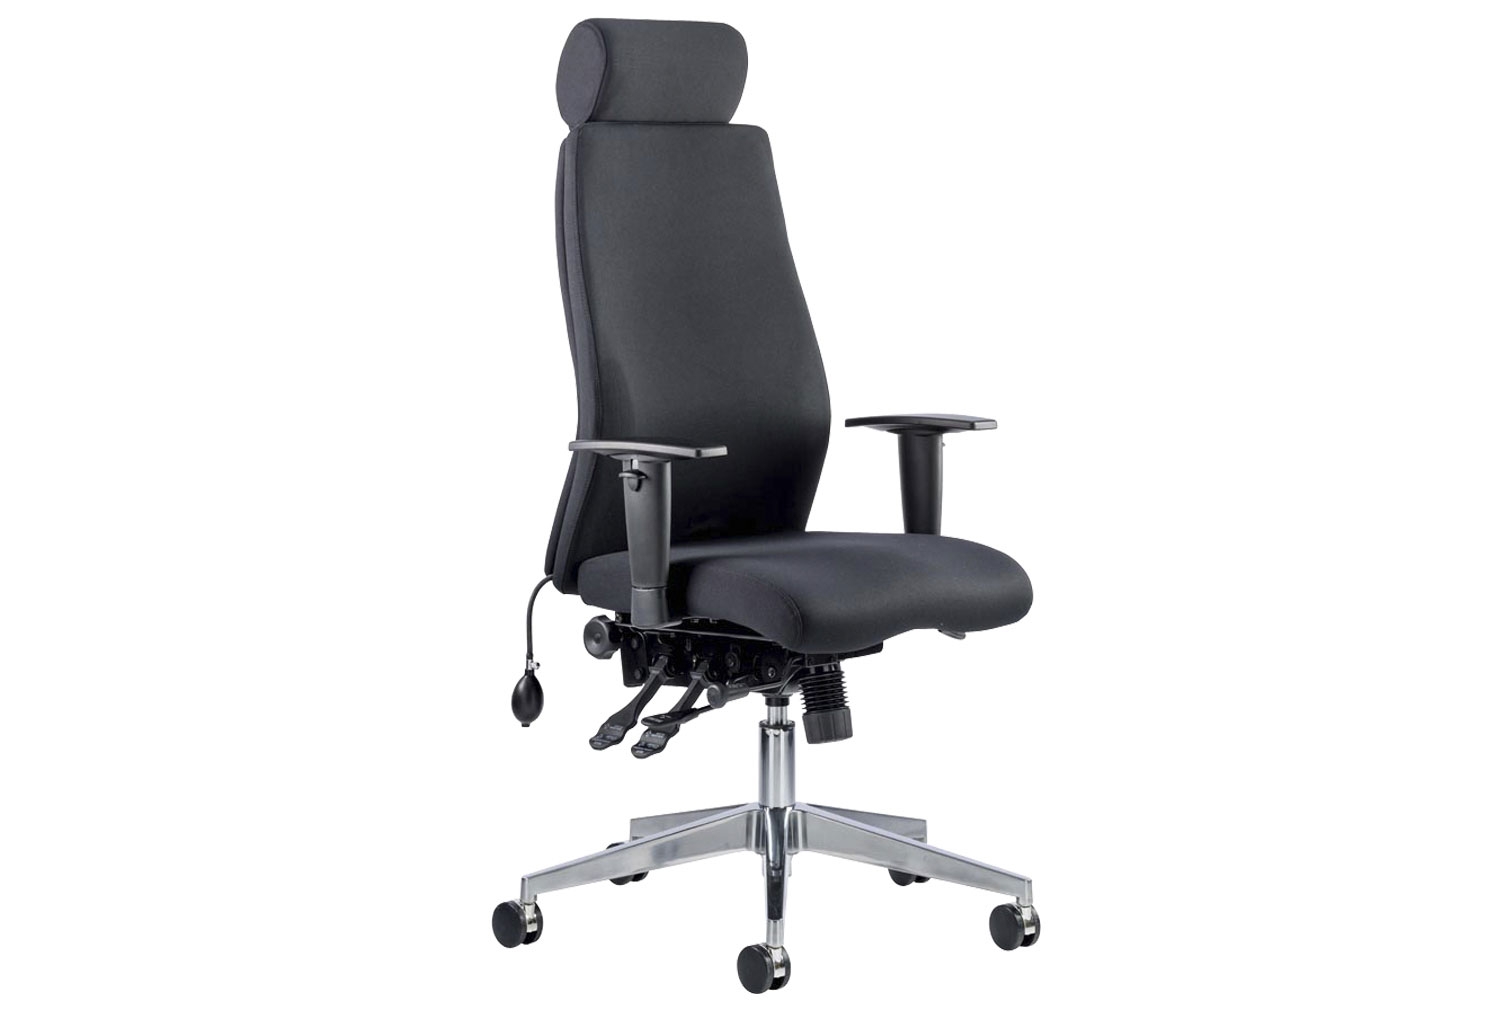 Brechin High Back Fabric Executive Office Chair With Headrest, Black, Fully Installed